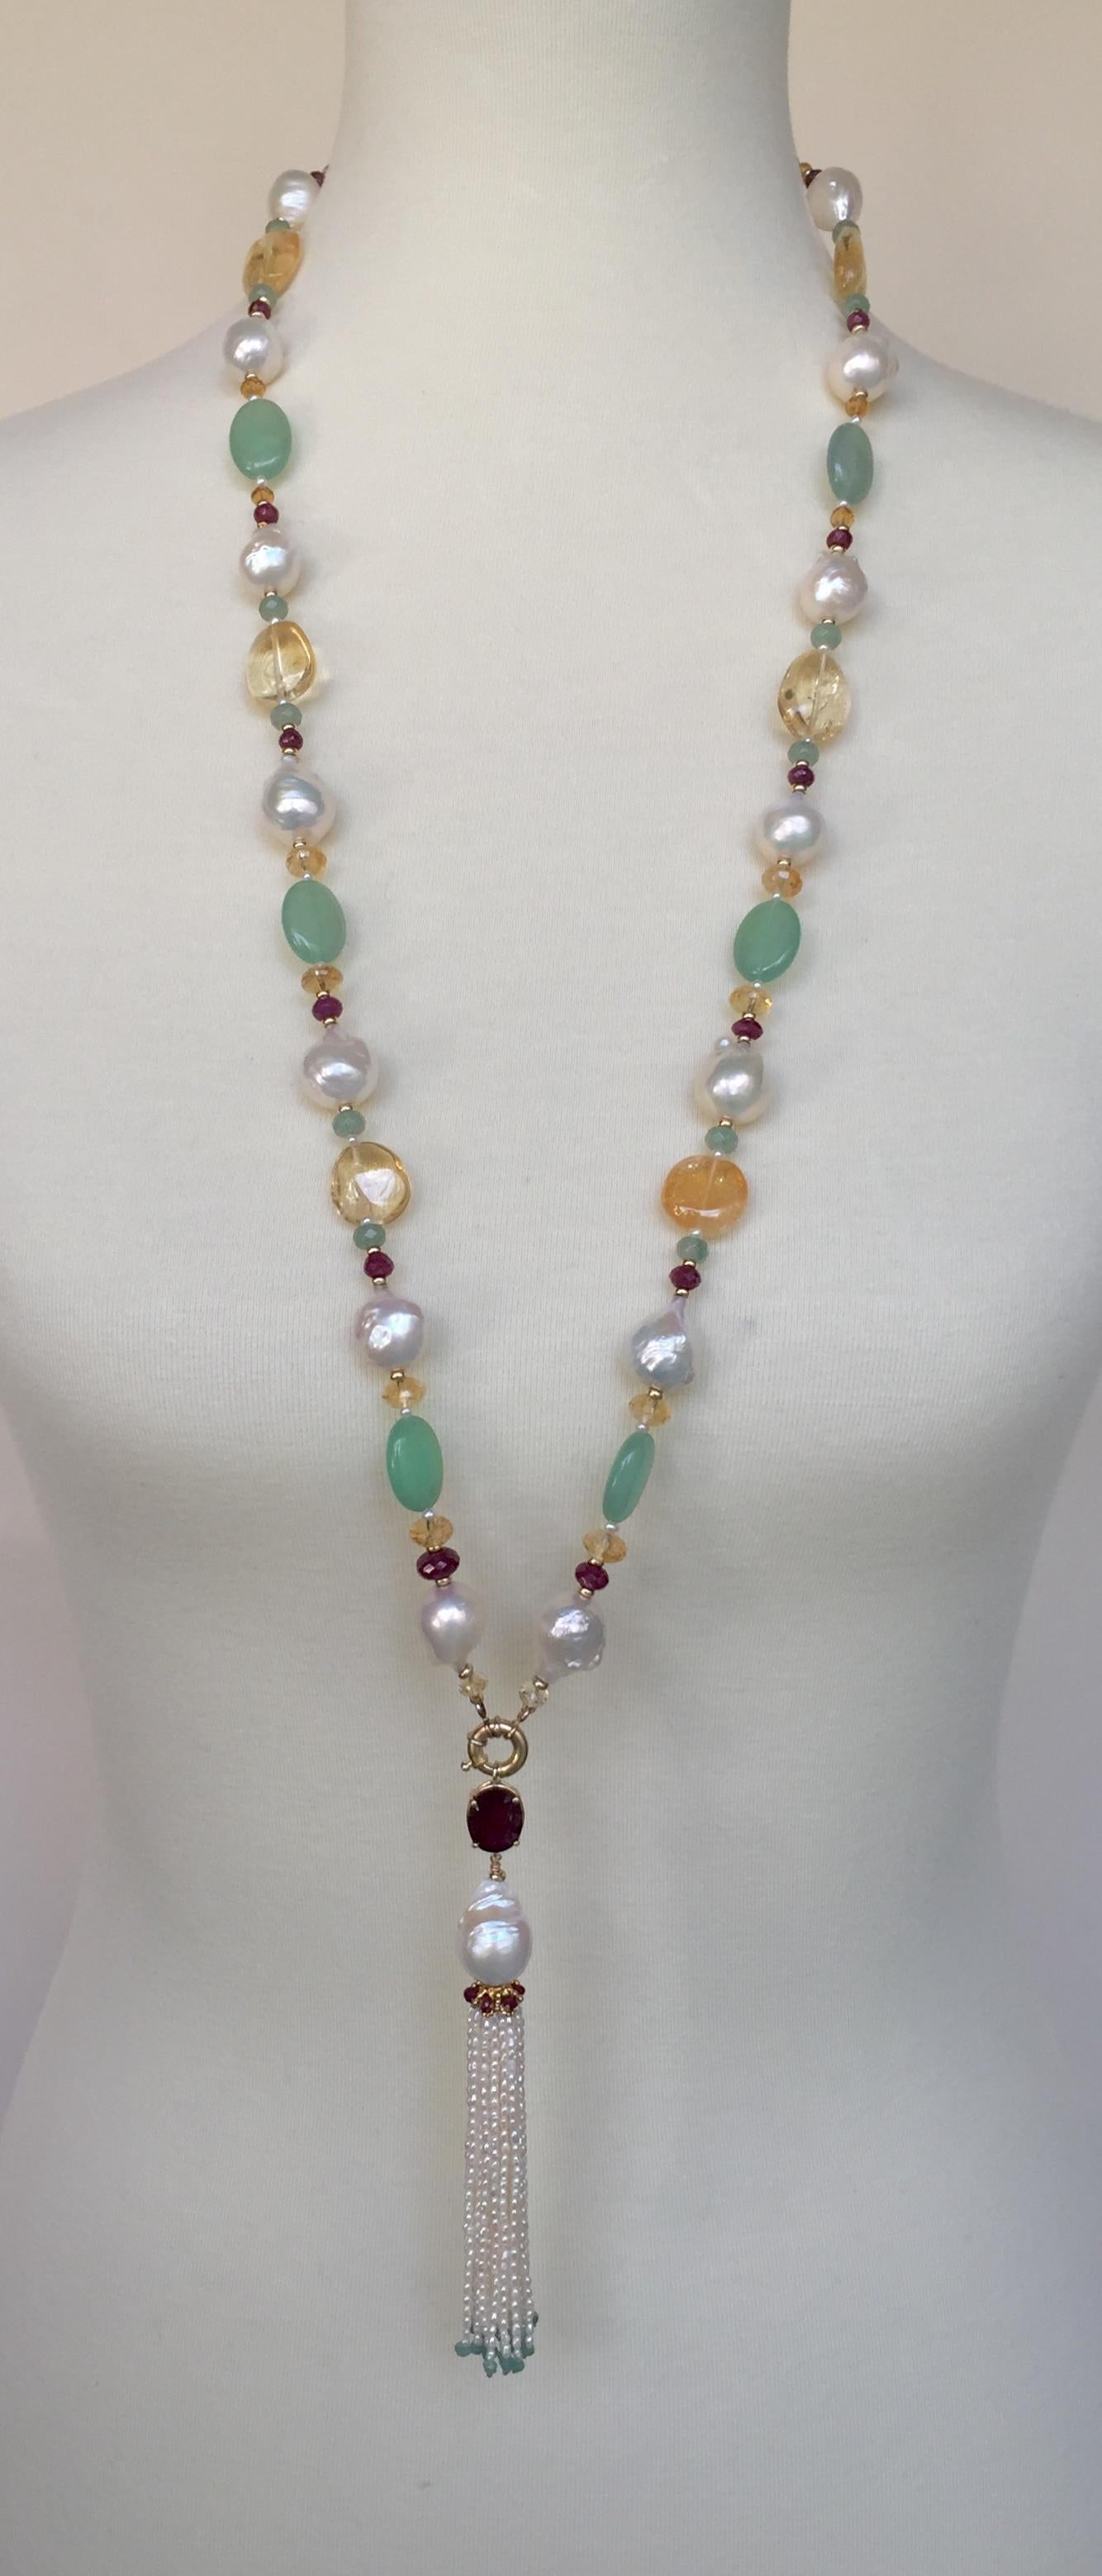 Glittering ruby, citrine, 14k yellow gold and apaptite complete this sautoir necklace with removable tassel. The warm tones of the 14k yellow gold beads, ruby stones, and citrine go  with the cooler toned of the white pearls, apatite, and green